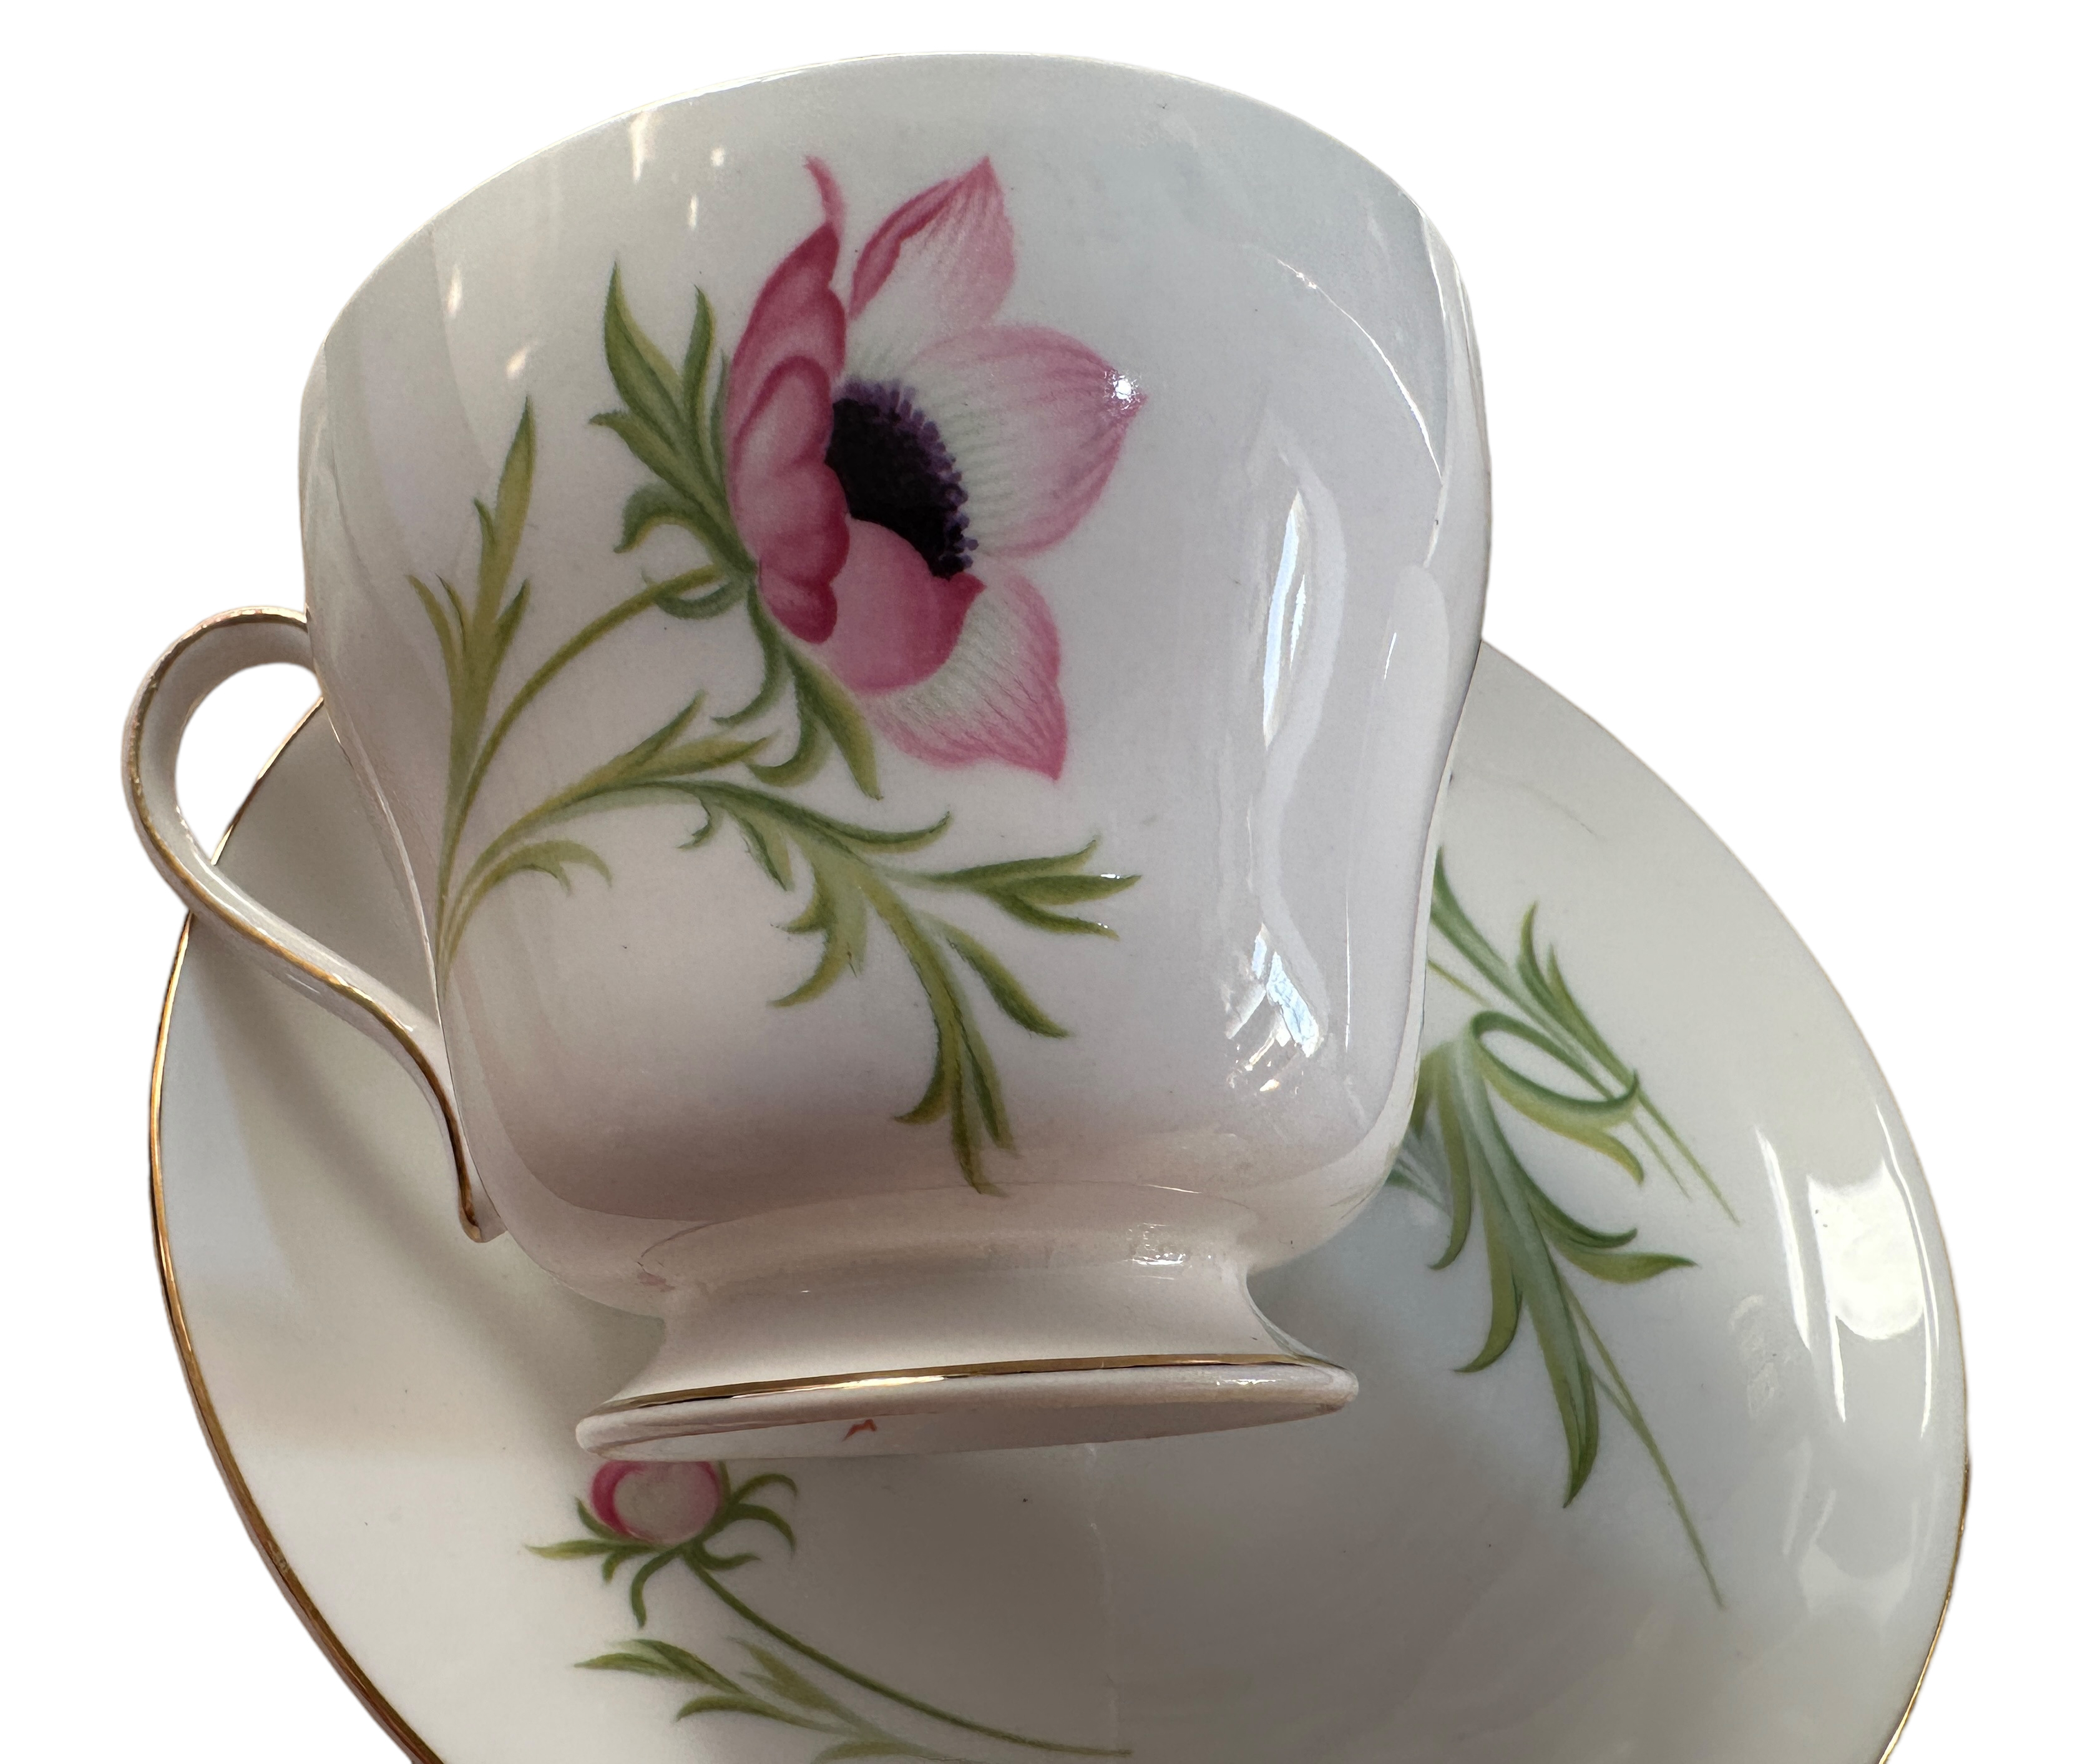 Vintage Shelley "Anemone Pattern" Teaset - 19 pieces. - Image 6 of 6